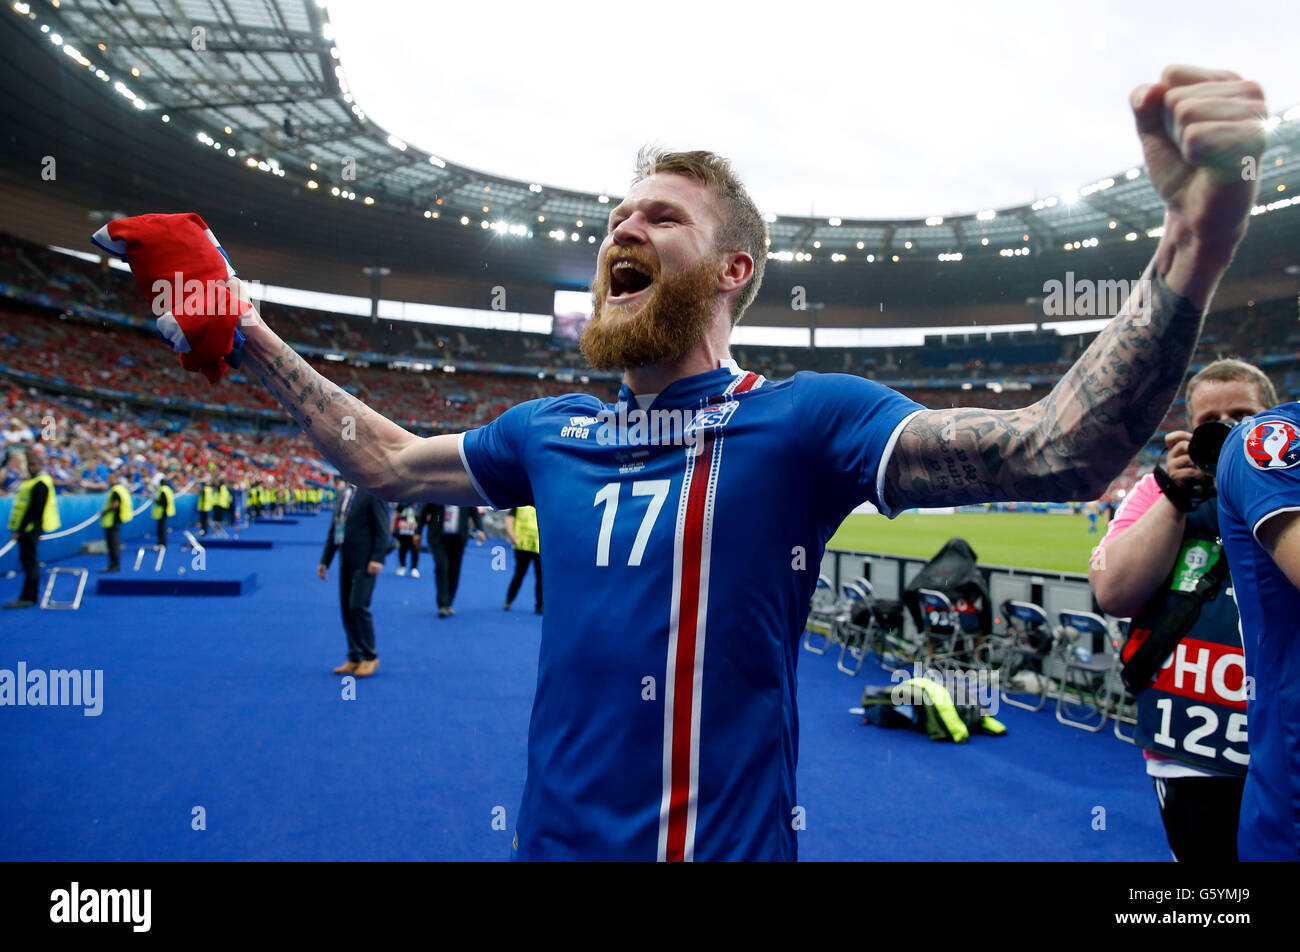 Iceland's Aron Gunnarsson celebrates qualifying for the last 16 round after the Euro 2016, Group F match at the Stade de France, Paris. PRESS ASSOCIATION Photo. Picture date: Wednesday June 22, 2016. See PA story SOCCER Iceland. Photo credit should read: Owen Humphreys/PA Wire. Stock Photo